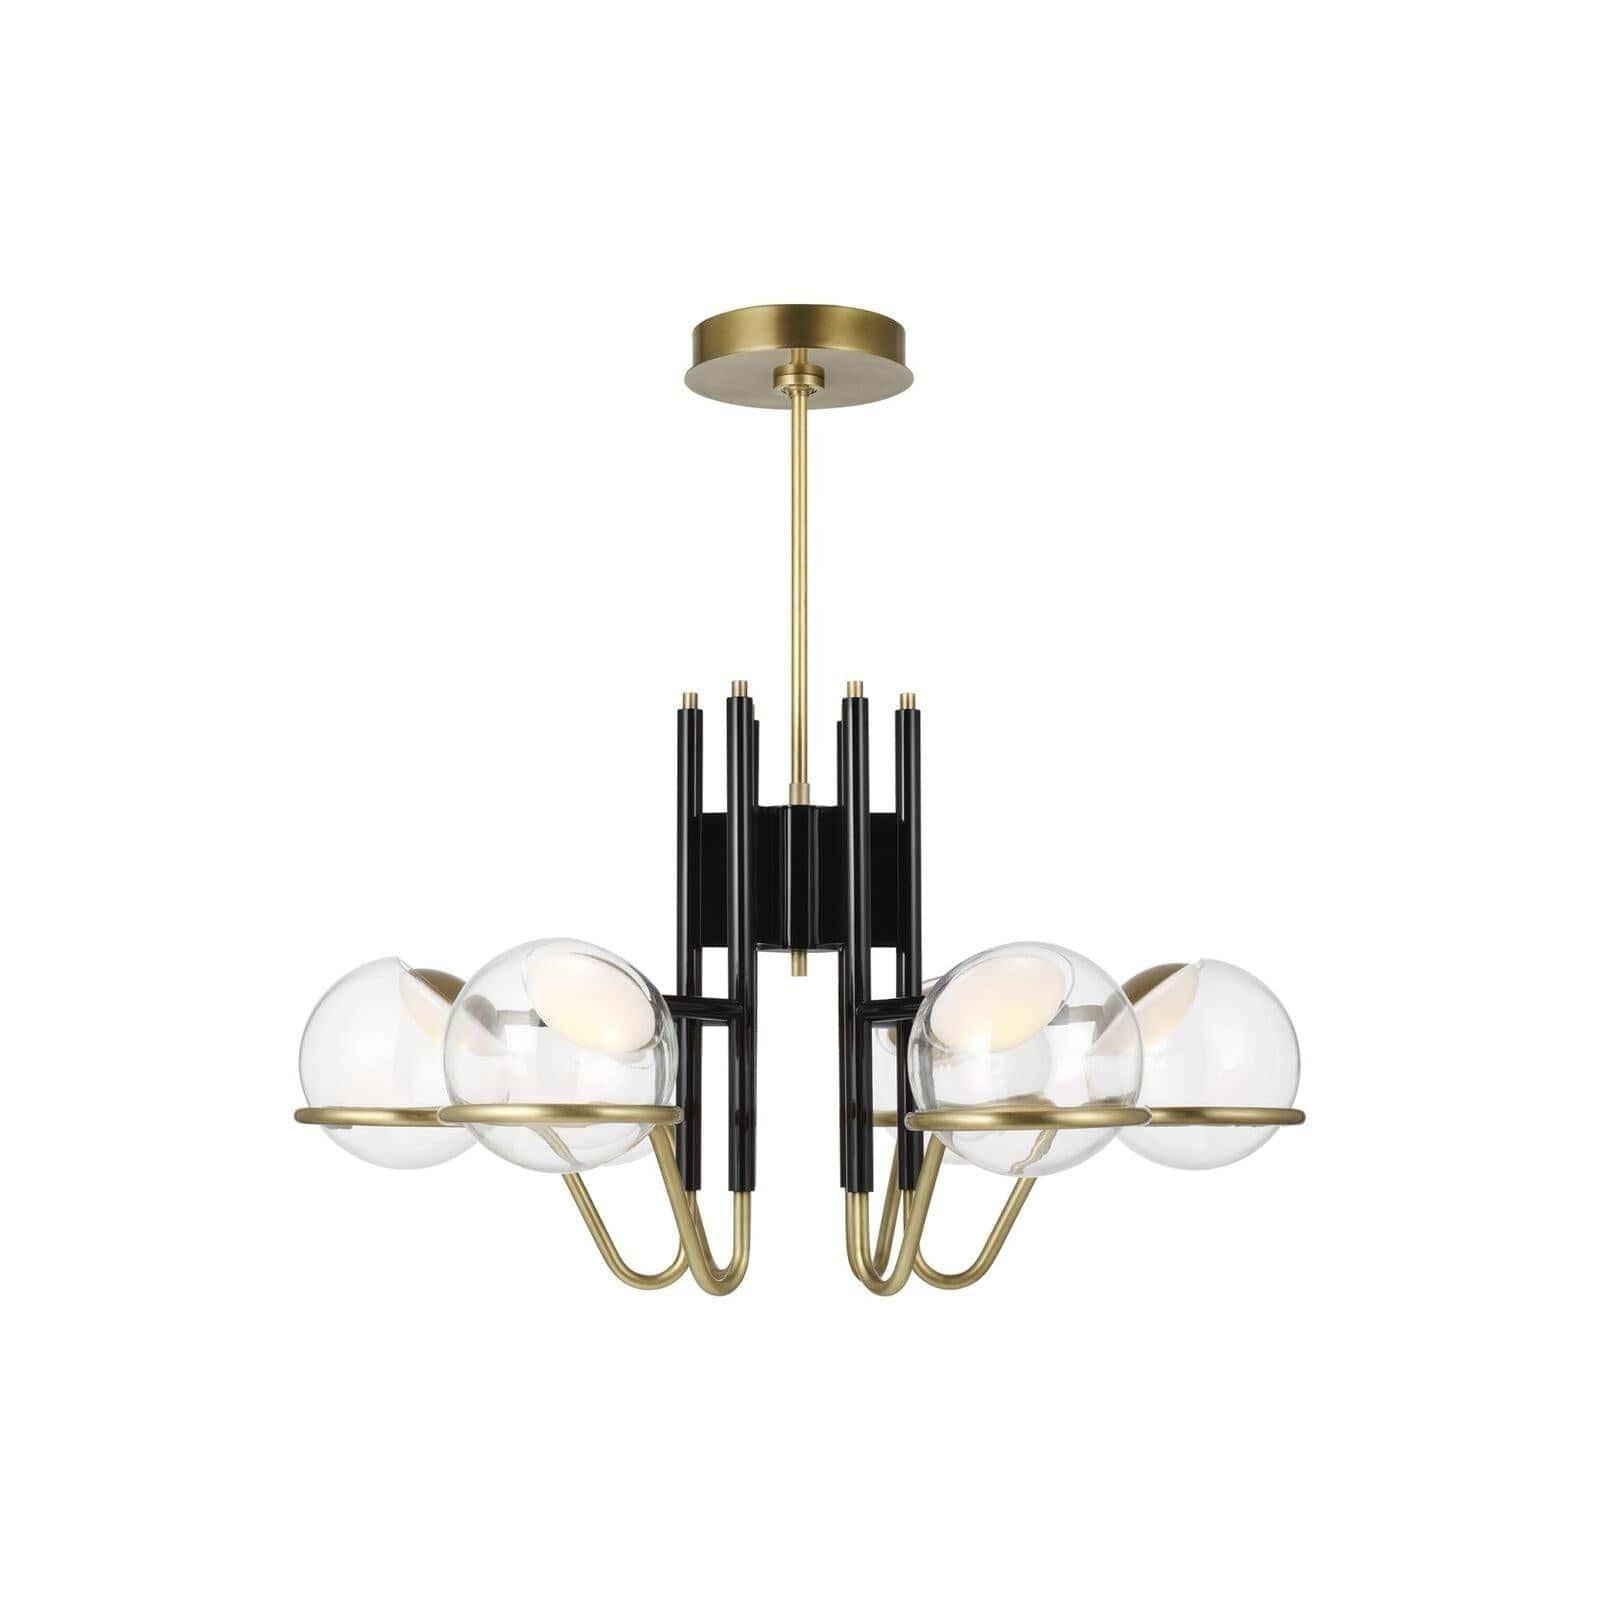 Crosby LED Chandelier